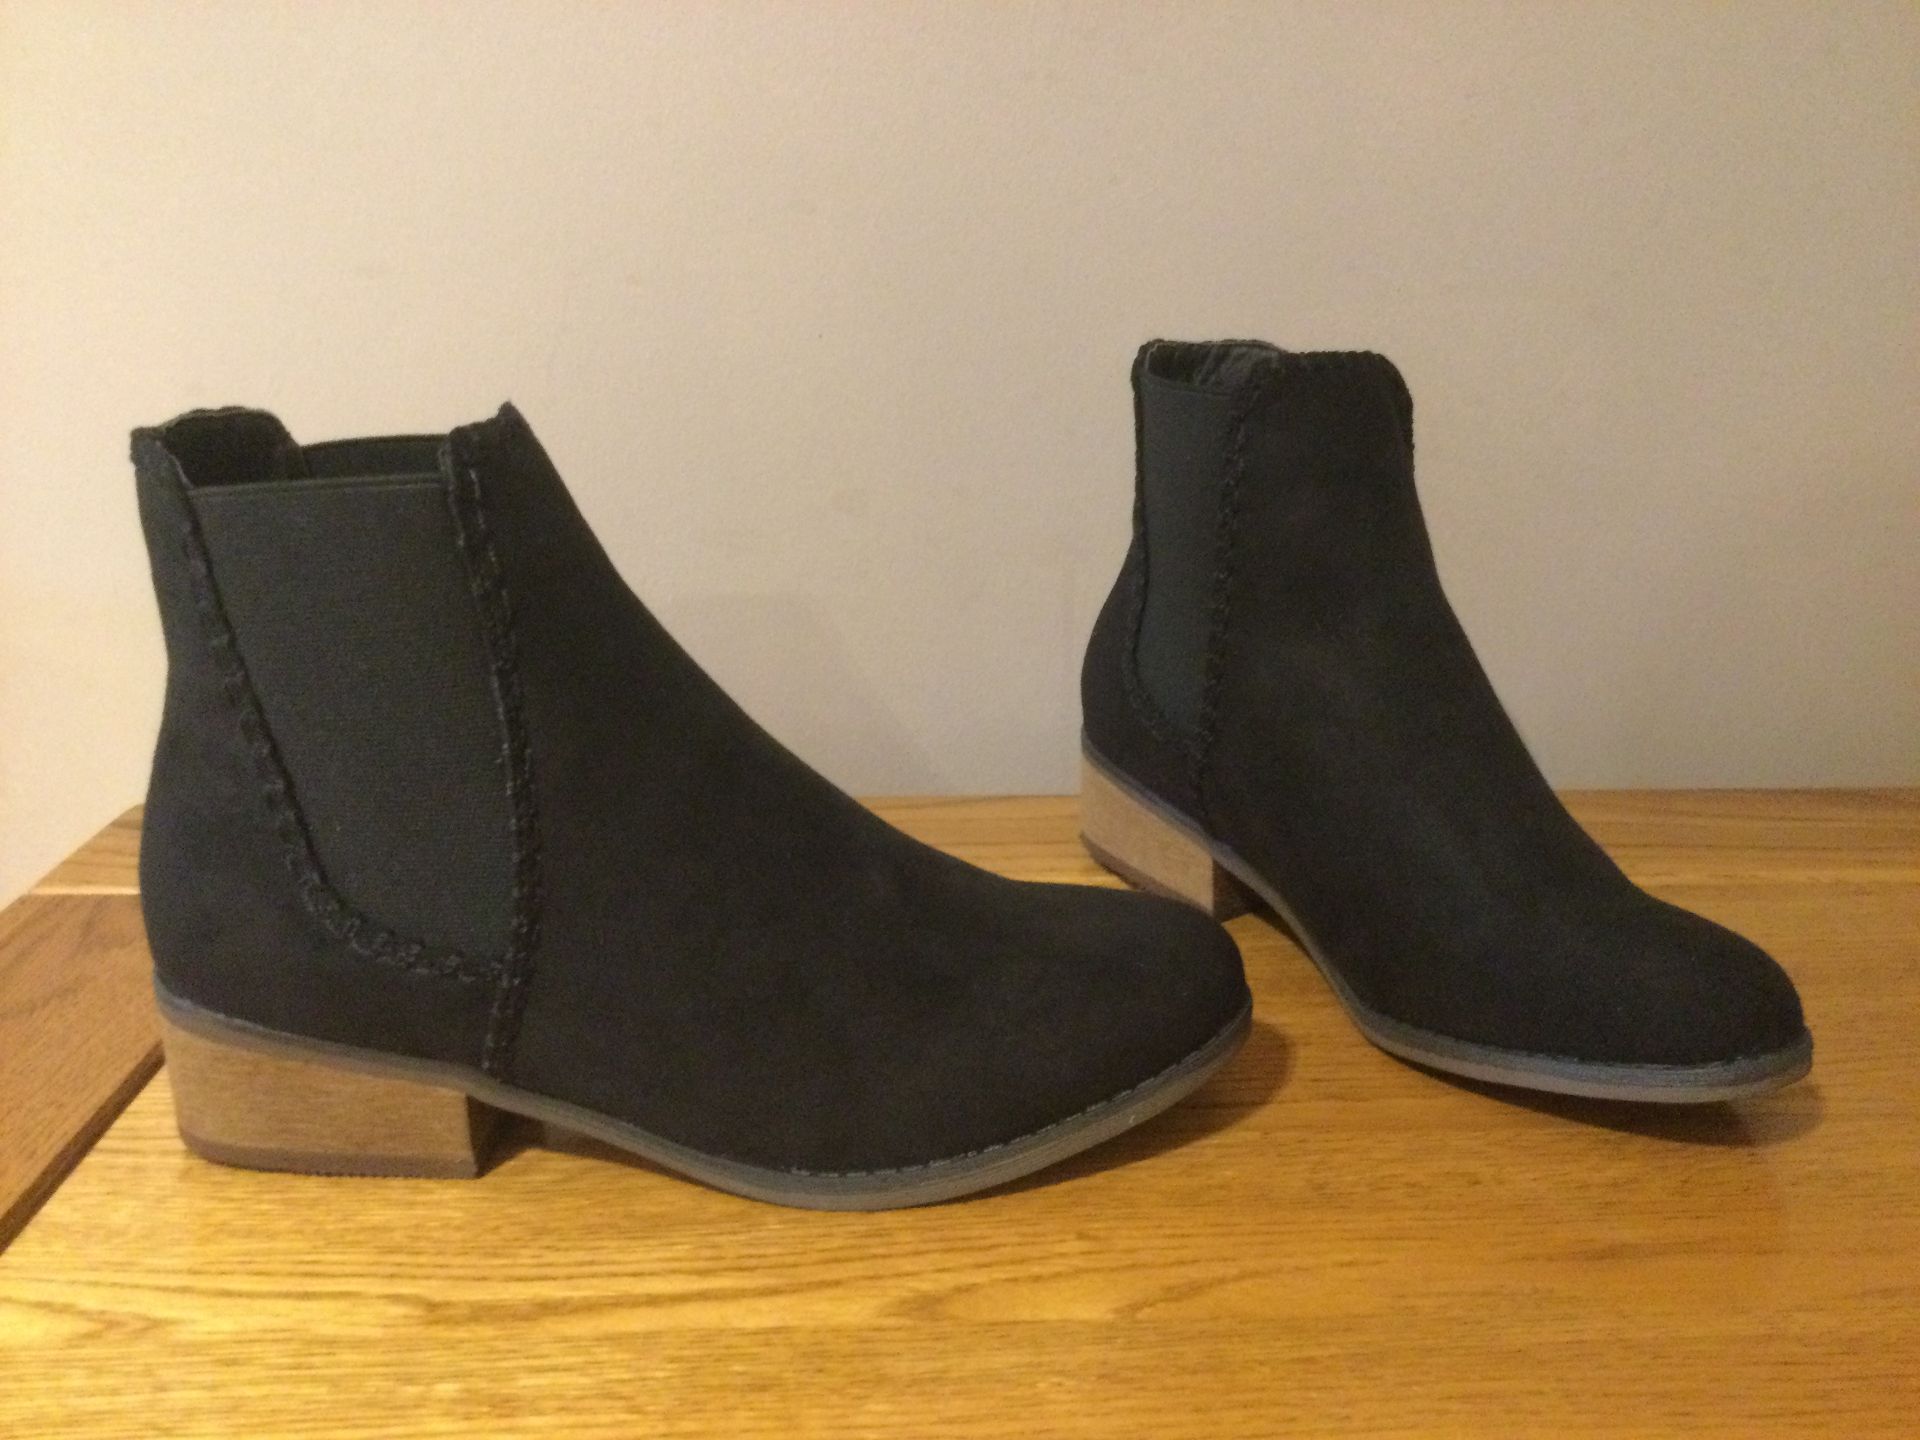 Dolcis “Pasha” Low Heel Ankle Boots, Size 6, Black - New RRP £45.99 - Image 4 of 6